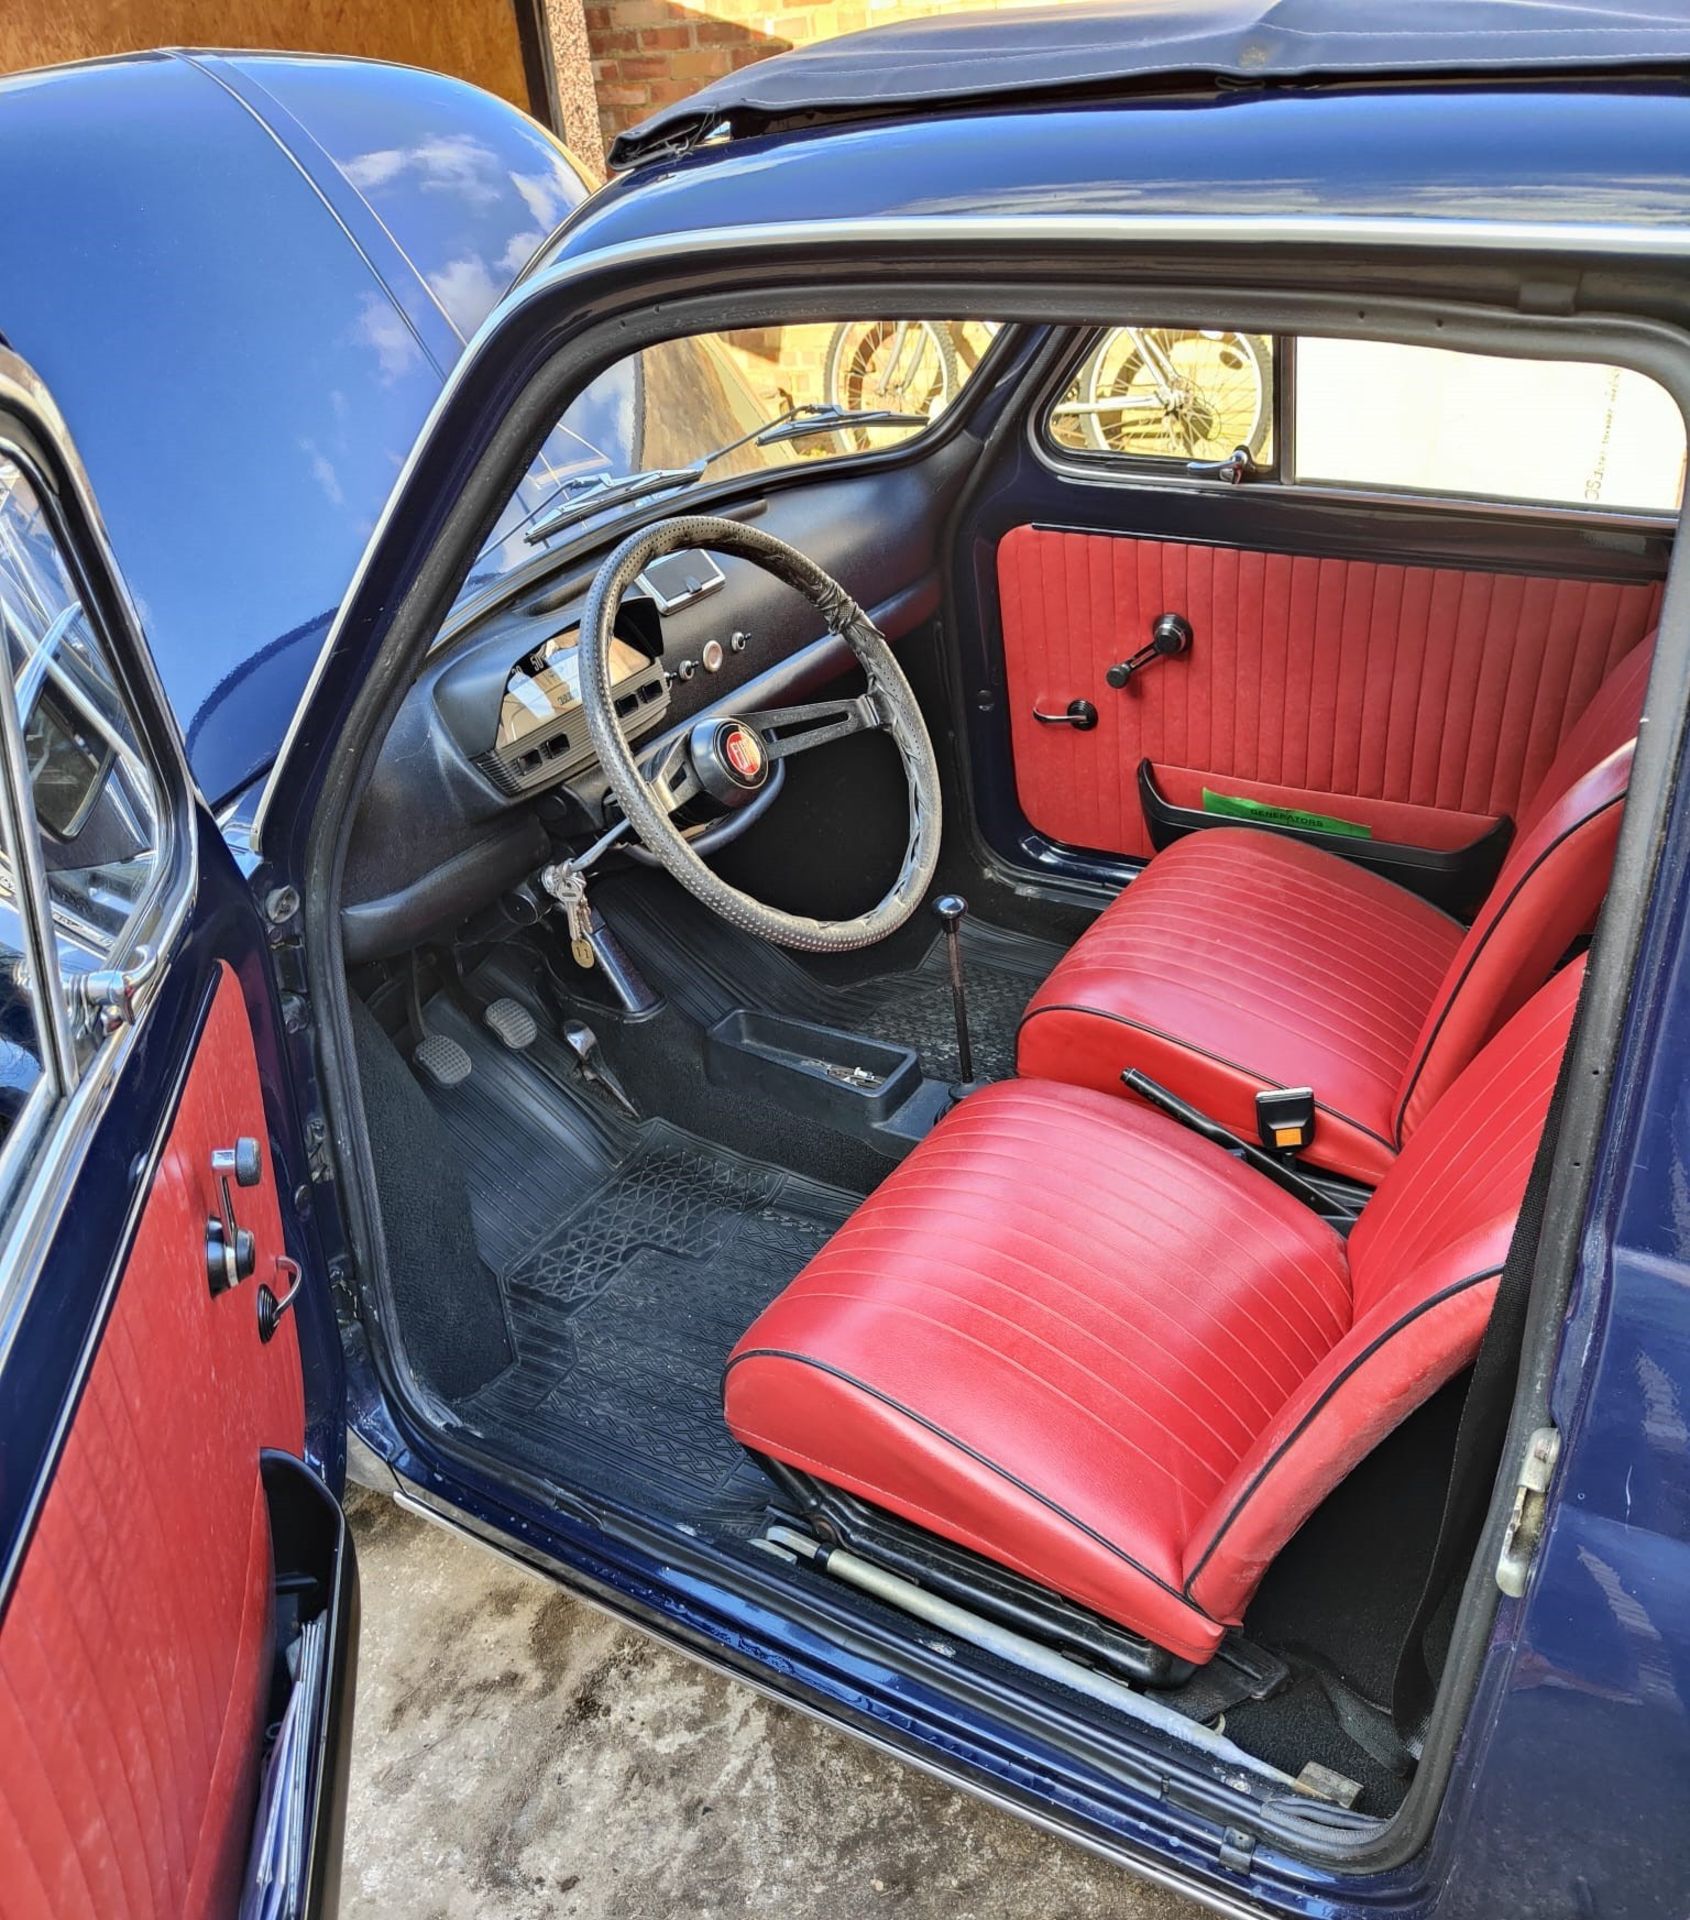 1971 FIAT 500L SALOON Registration Number: JBY 492J Chassis Number: TBA Recorded Mileage: 40,300 - Image 11 of 13